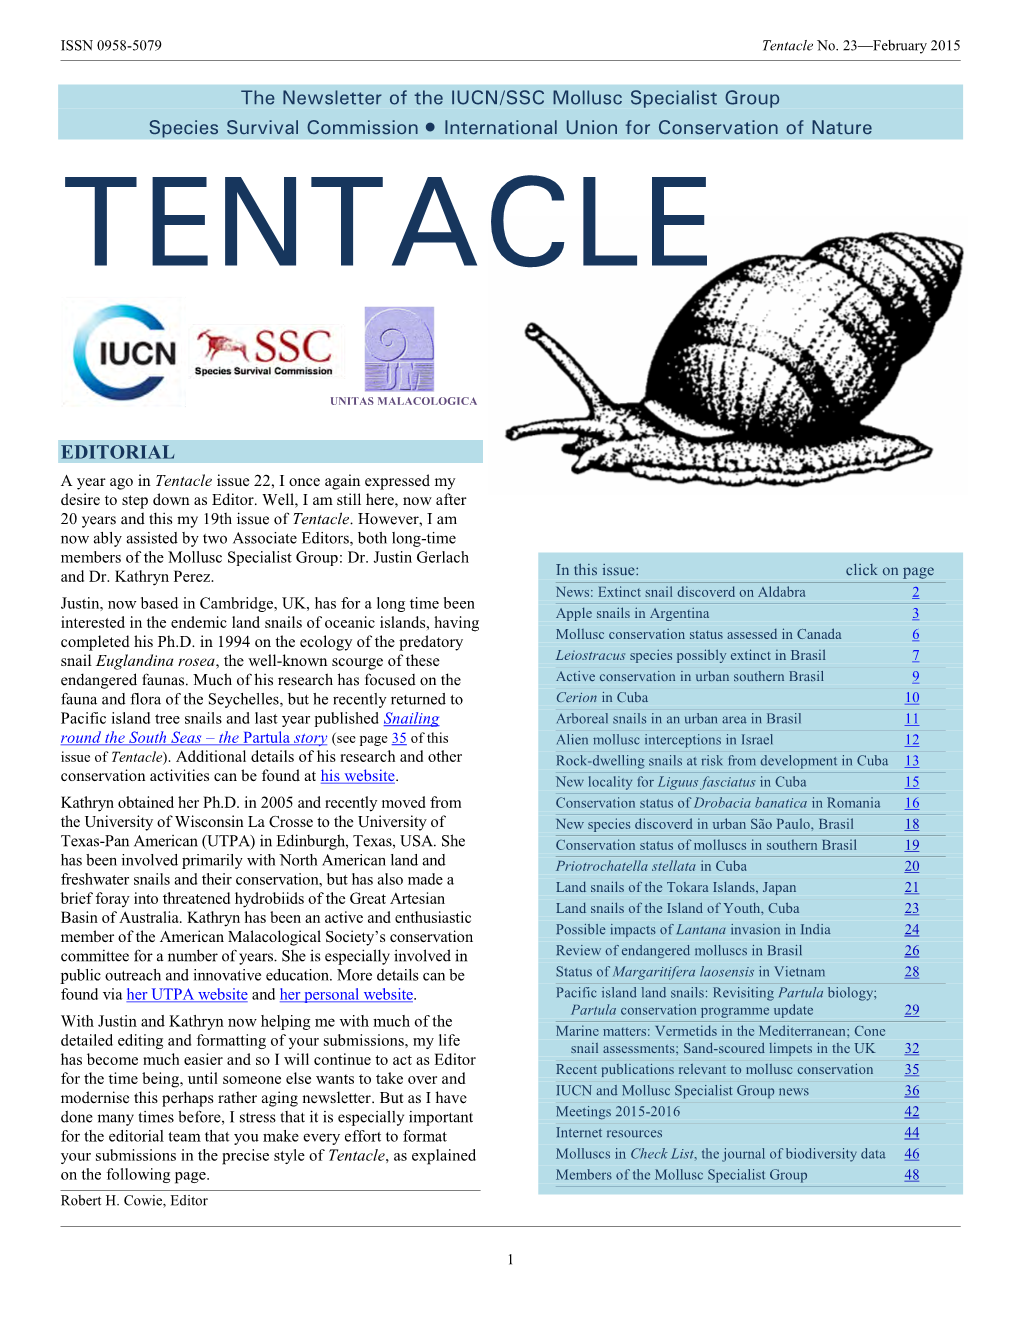 The Newsletter of the IUCN/SSC Mollusc Specialist Group Species Survival Commission  International Union for Conservation of Nature